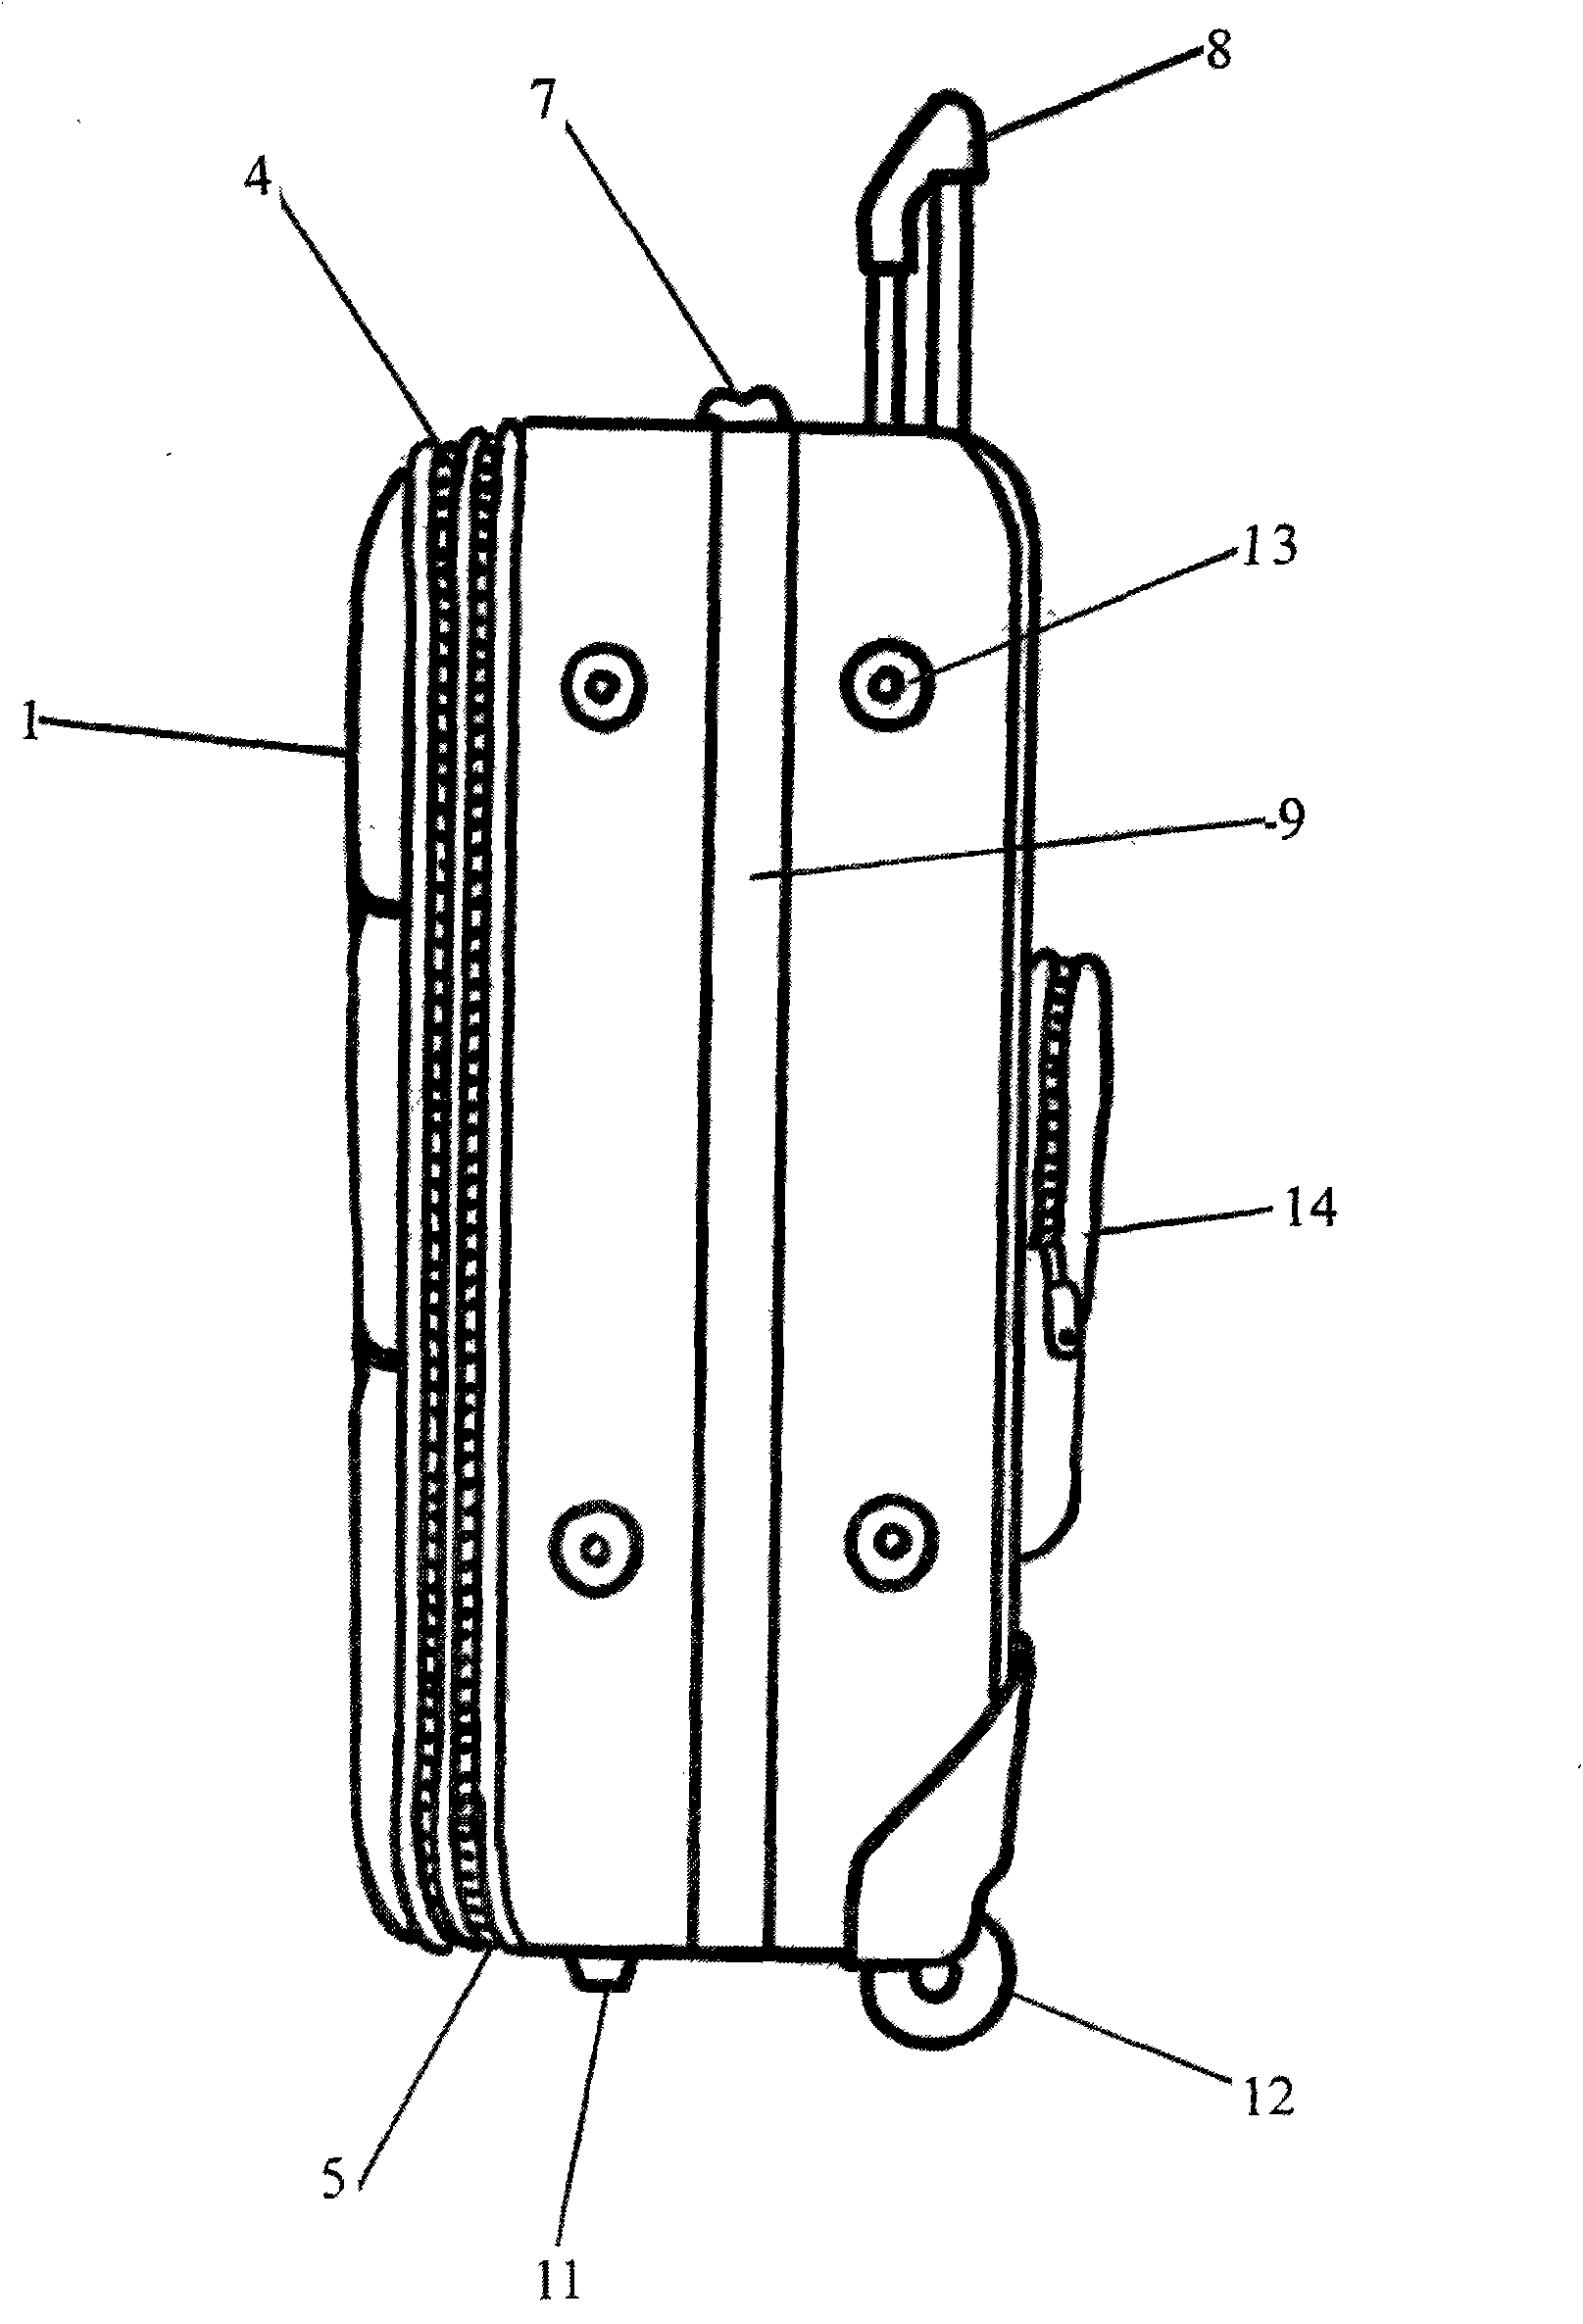 Draw-bar box with two pocket mouths for loading two zippers on front surface of box